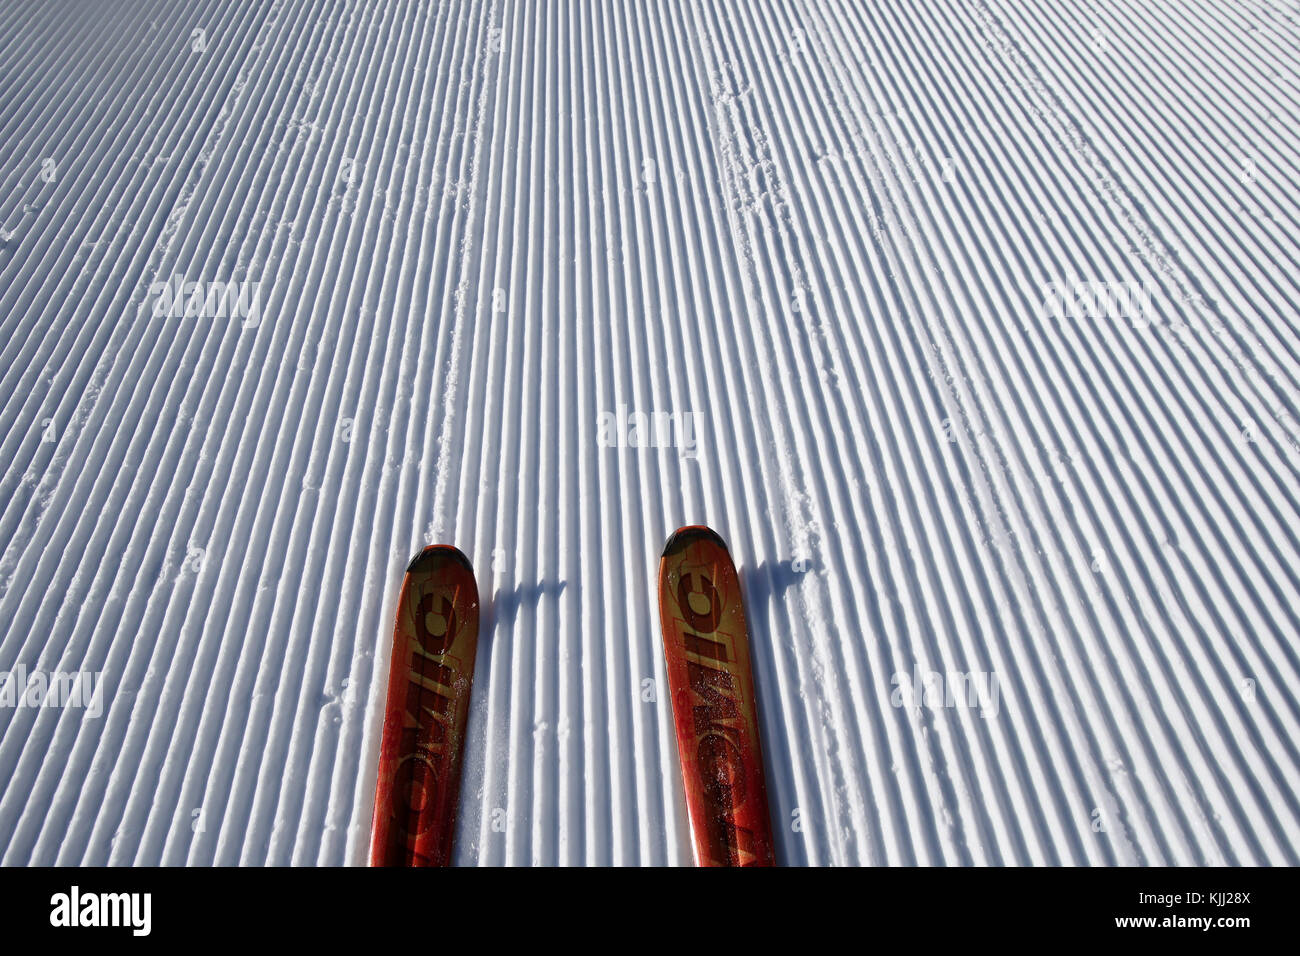 French Alps. Red pair of skis on snow. Groomed Ski slope. France. Stock Photo